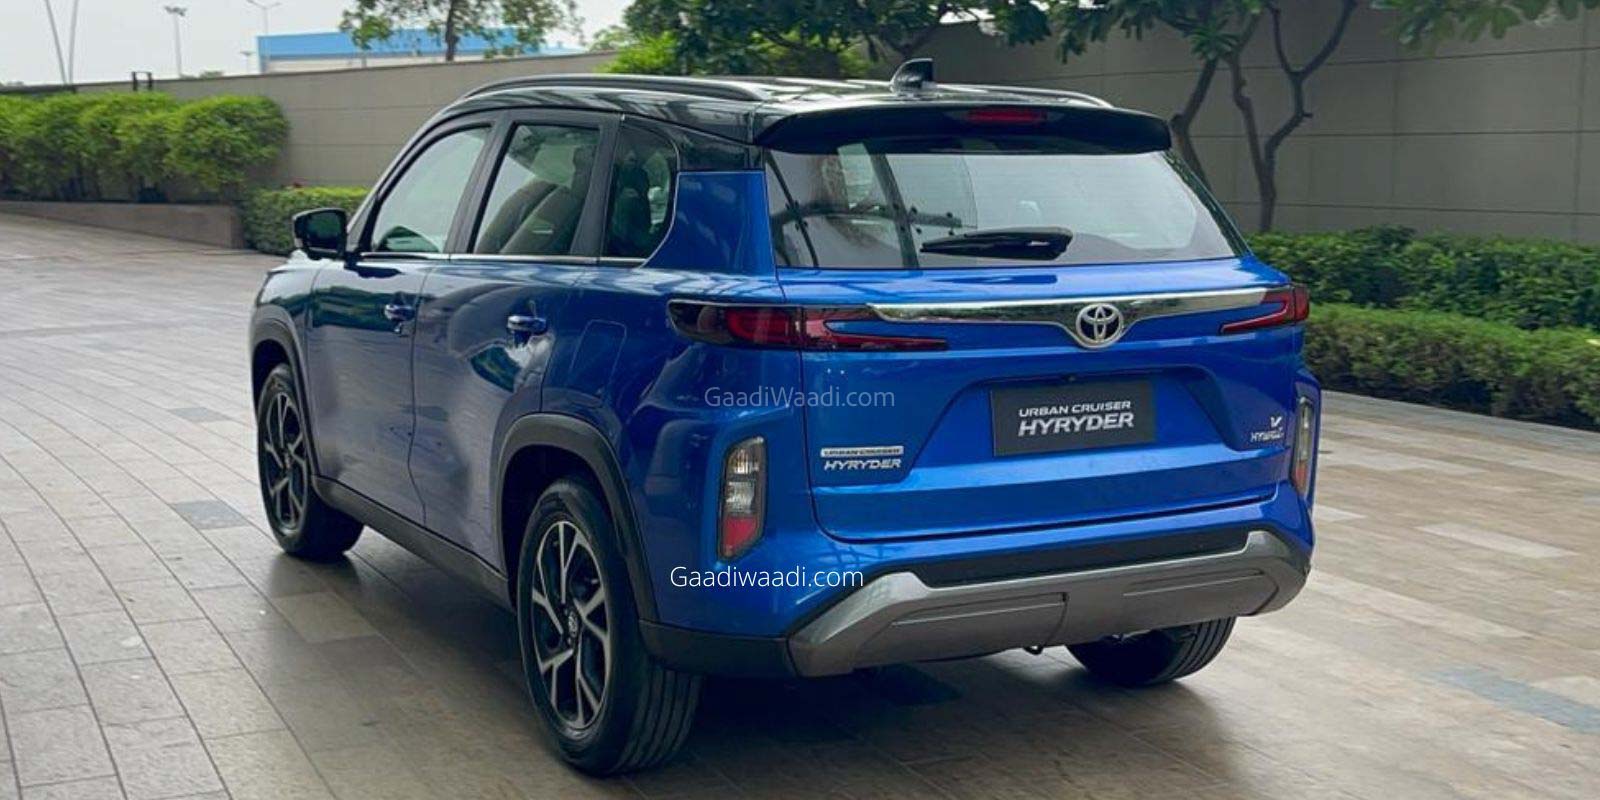 Toyota Hyryder To Likely Carry Affordable Price Tag – Under Rs. 10 Lakh?